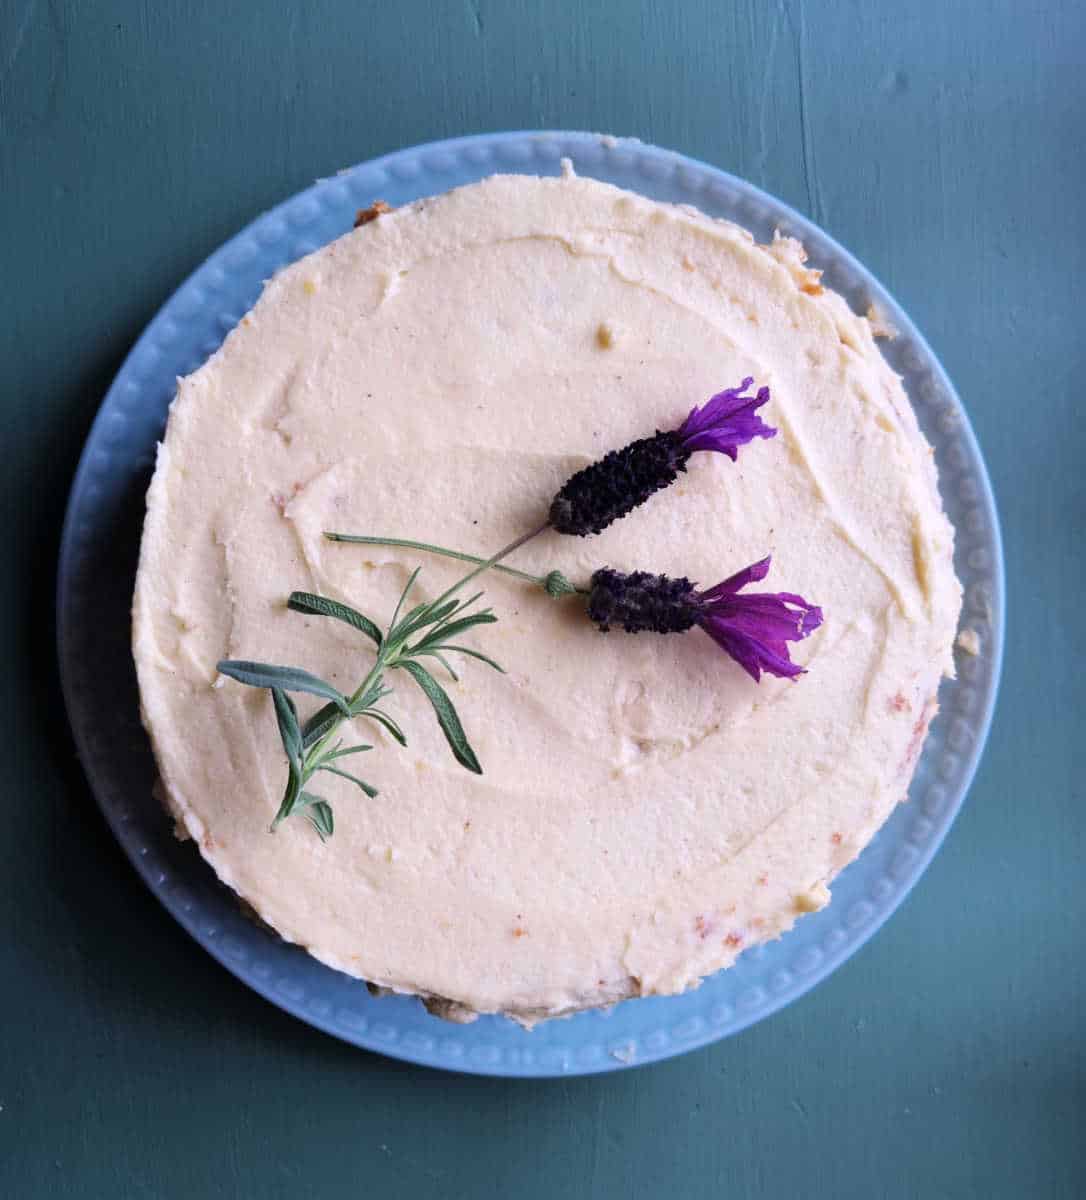 iced-cake-with-the-best-icing-white-two-lavender-sprigs-on-top